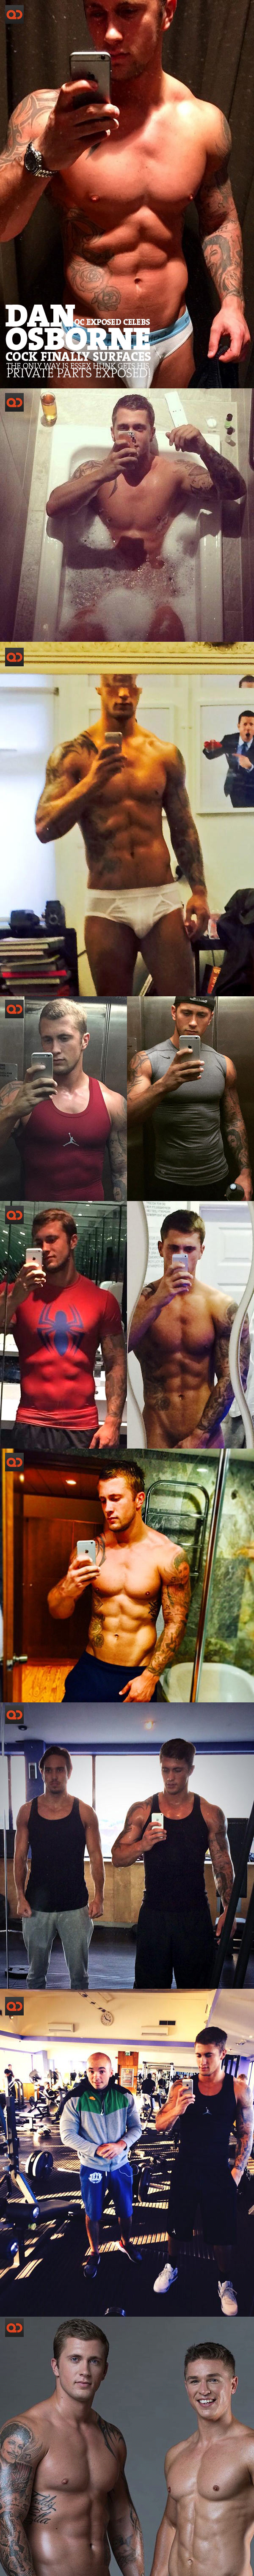 Dan Osborne's Cock Finally Surfaces - After Much Teasing The Only Way Is Essex Hunk Gets His Private Parts Exposed!